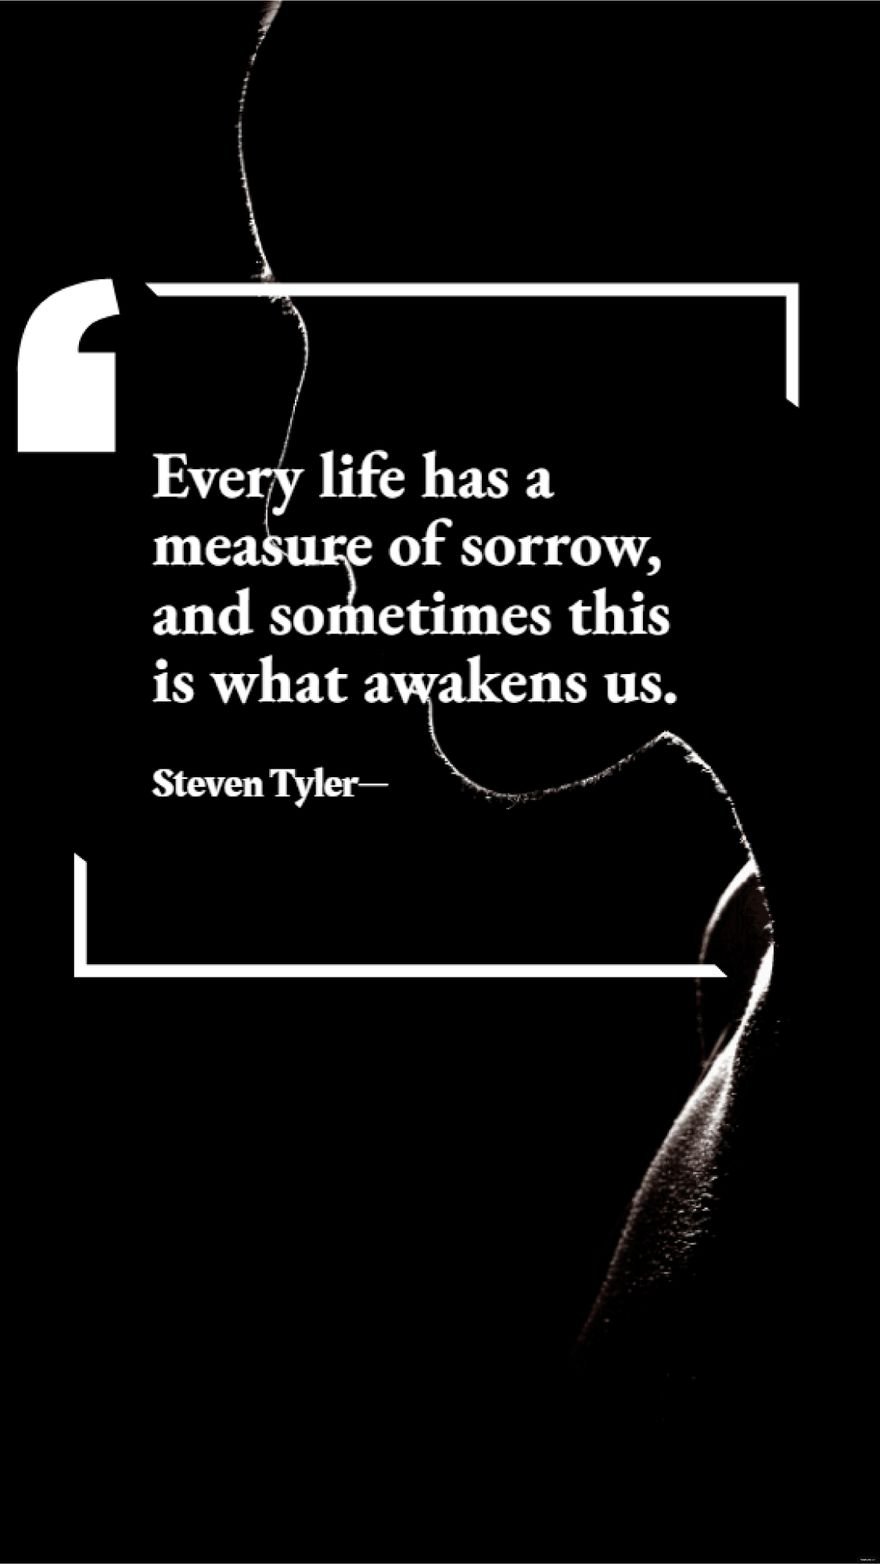 Steven Tyler - Every life has a measure of sorrow, and sometimes this is what awakens us.